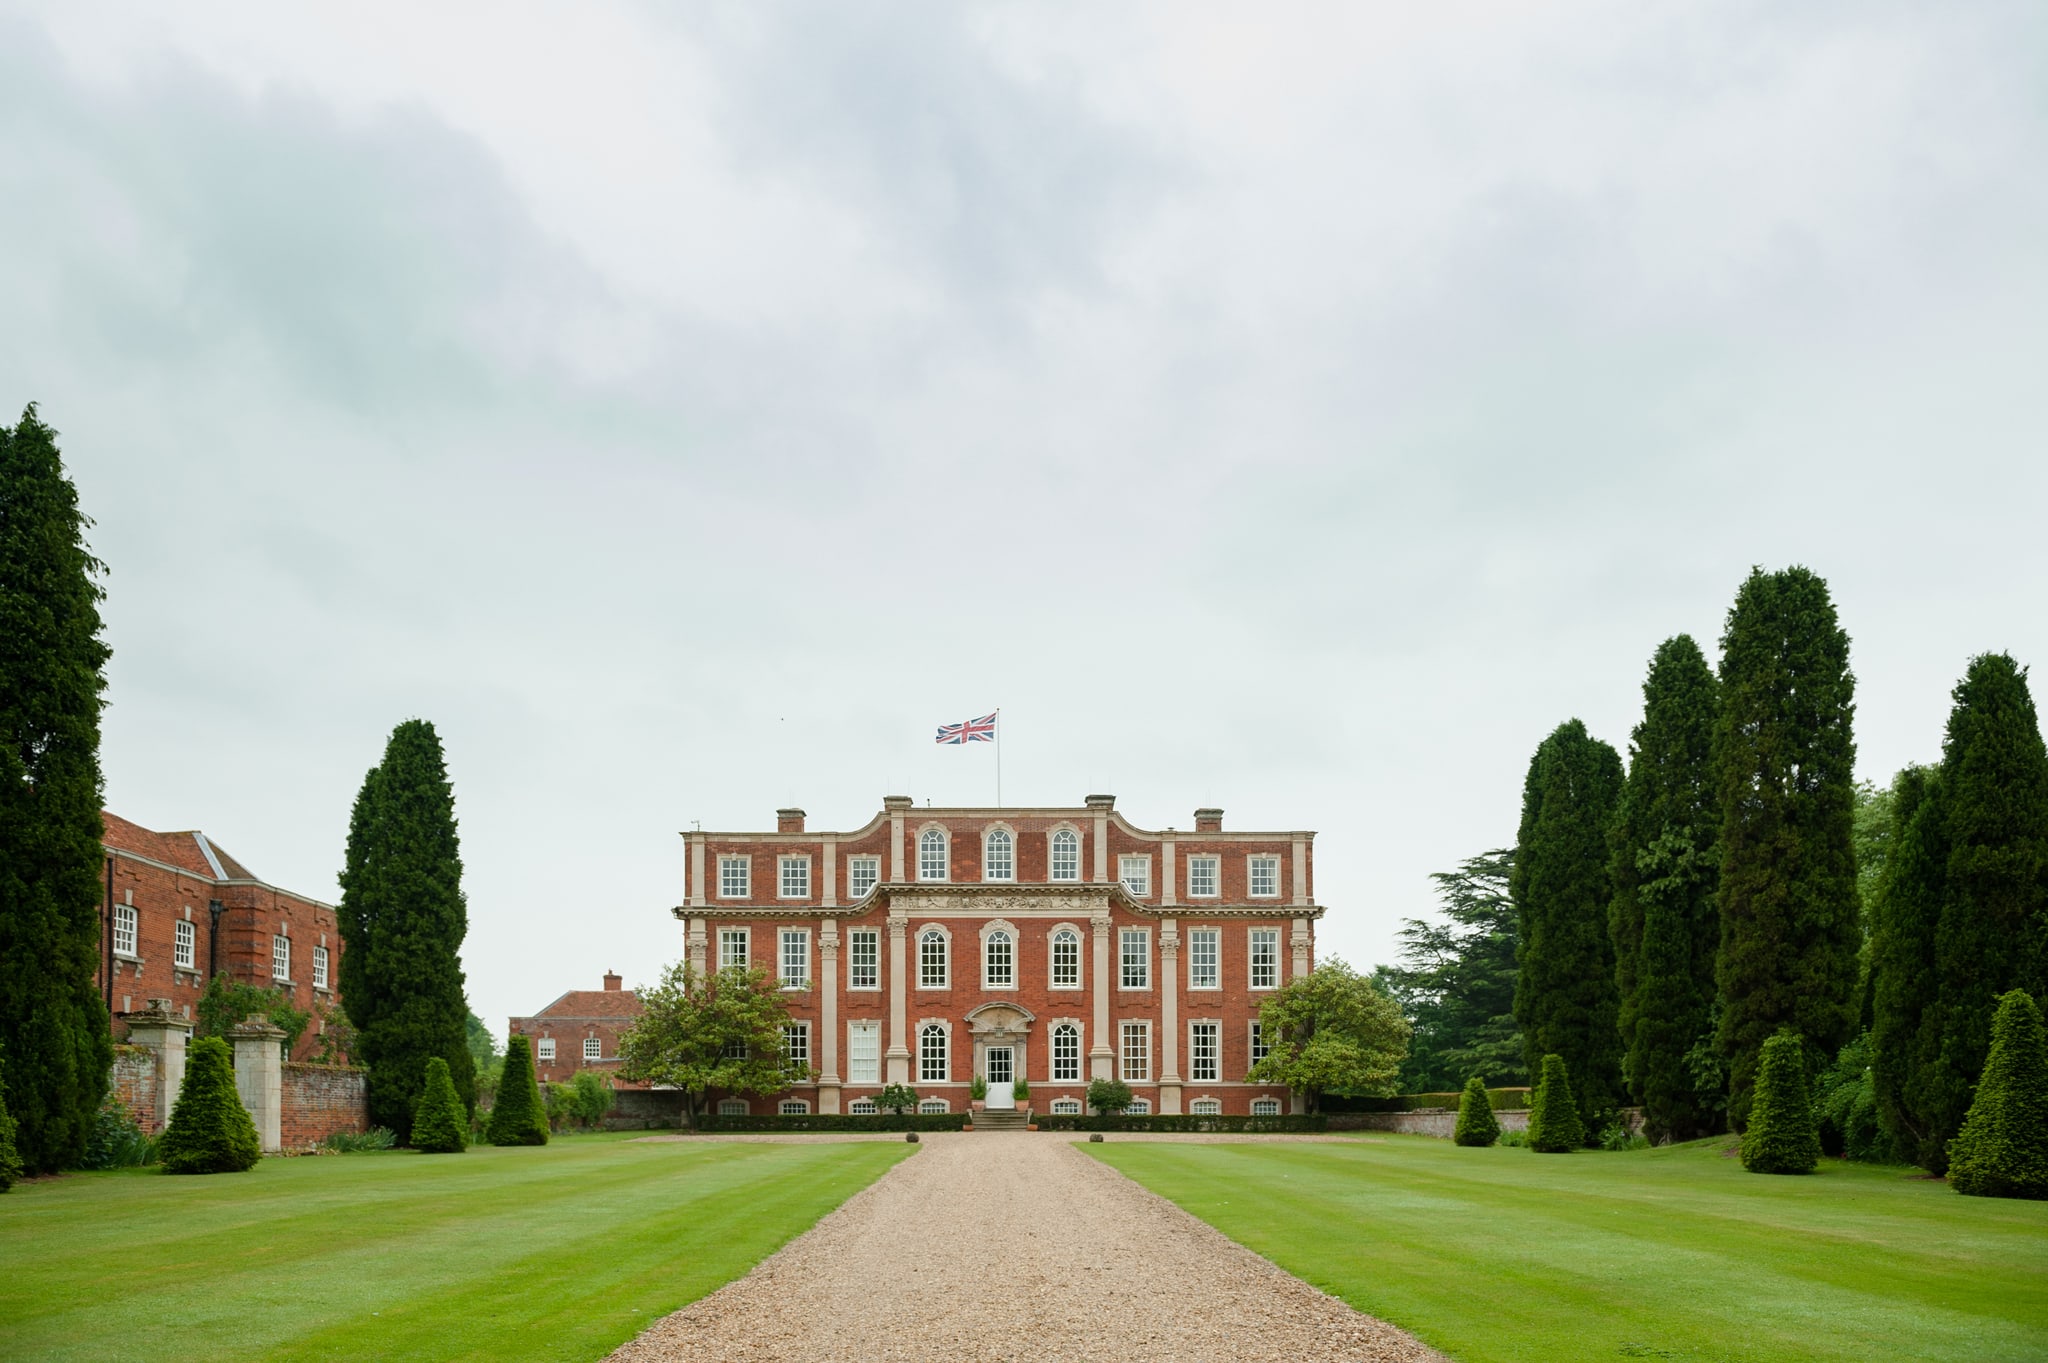 The front of Chicheley Hall